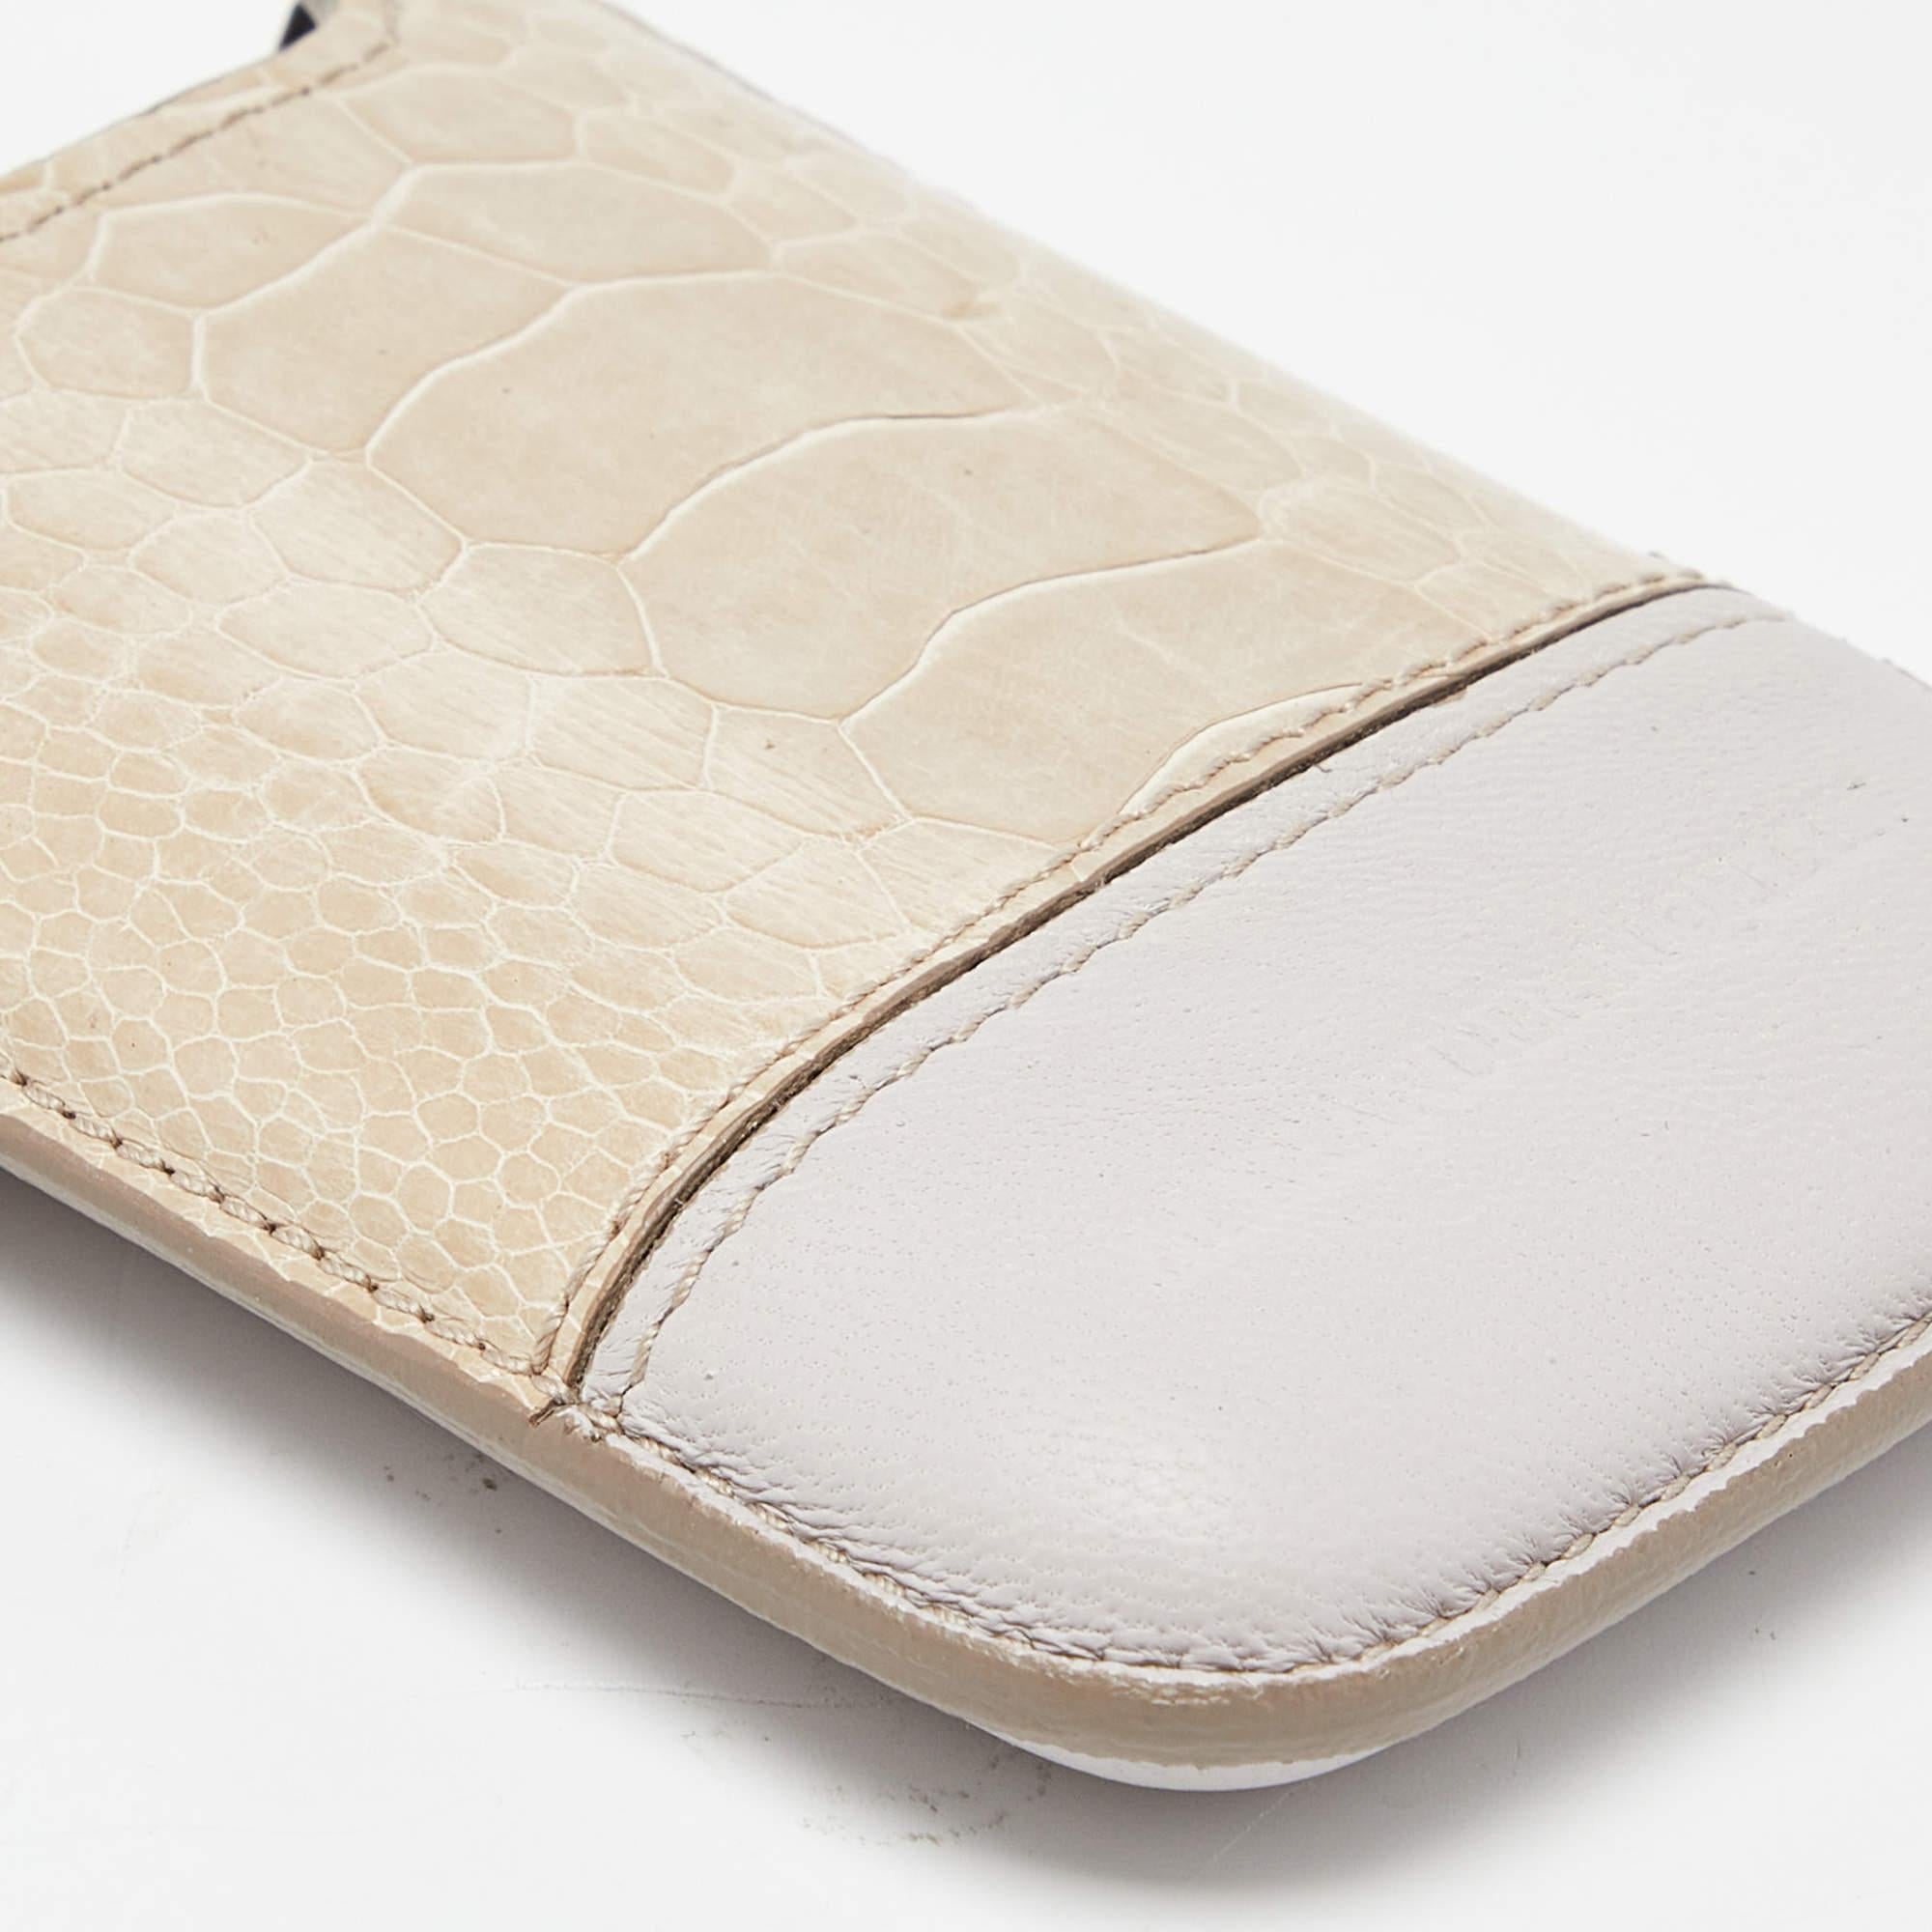 Alexander Mcqueen Beige Croc Embossed and Leather Phone Case For Sale 4